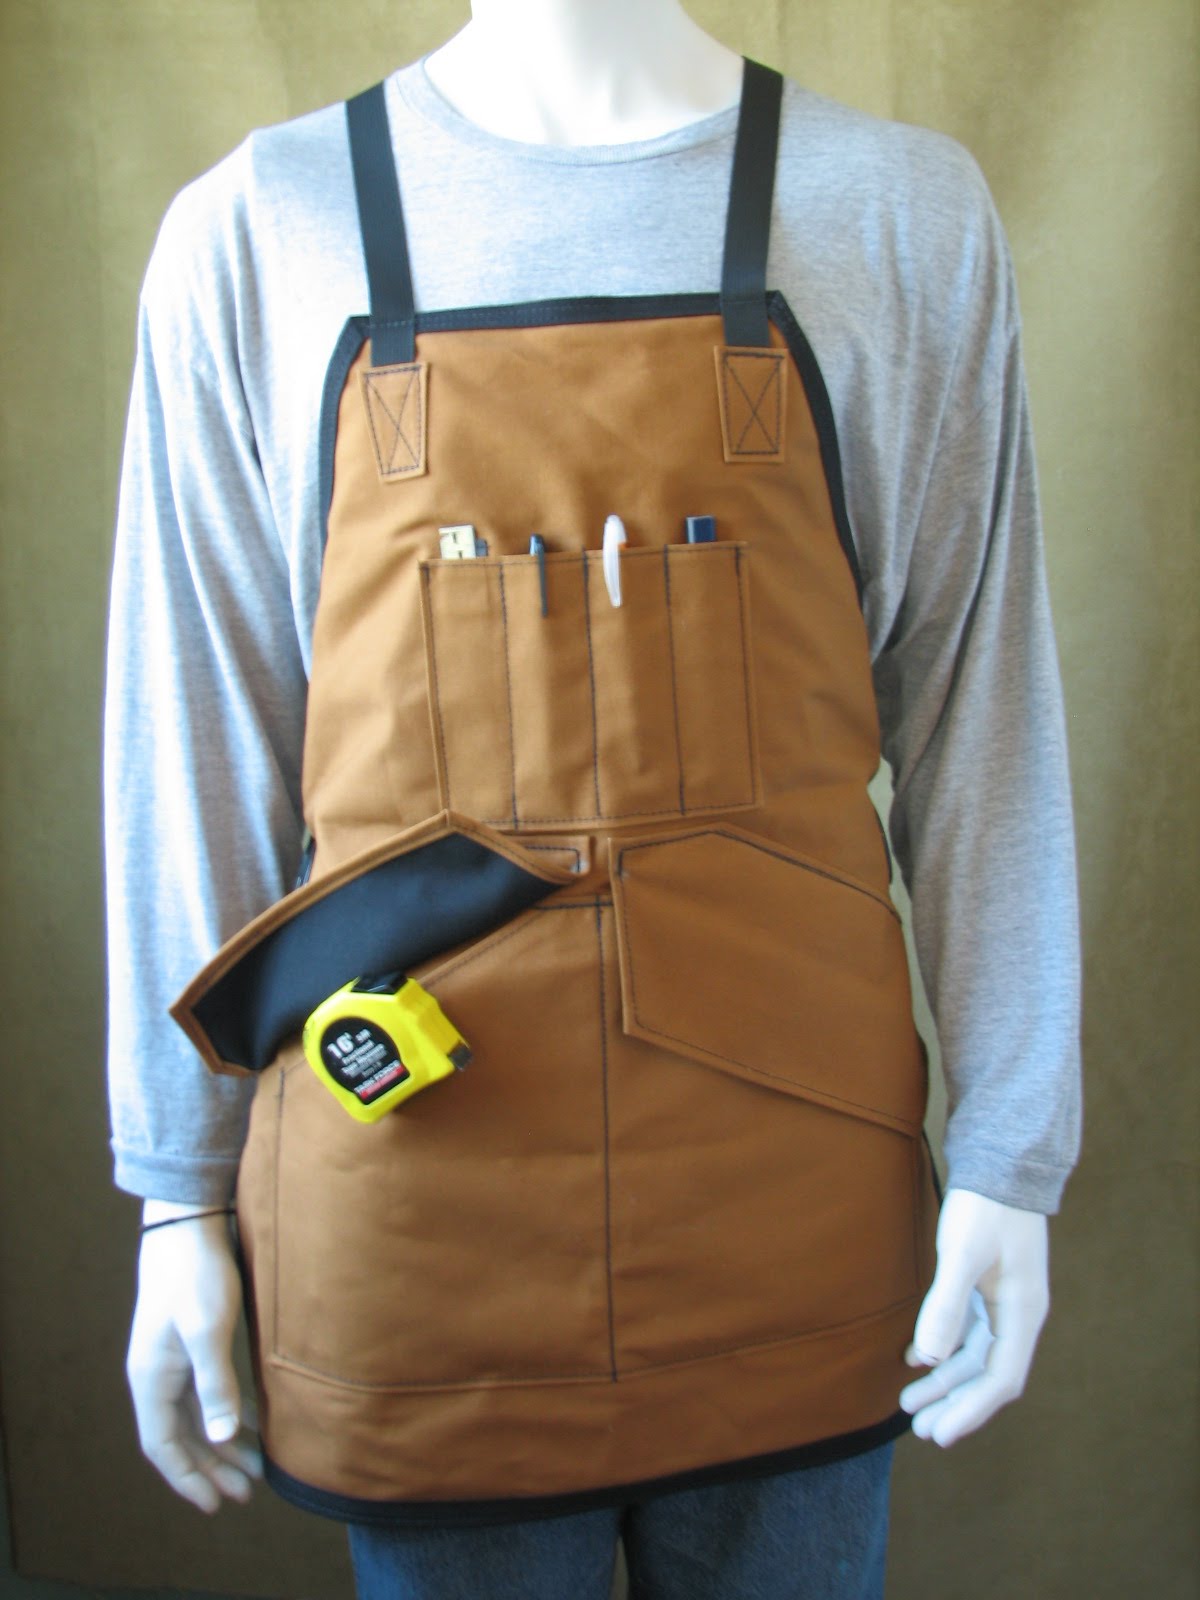 23 Awesome Woodworking Apron Pattern | egorlin.com